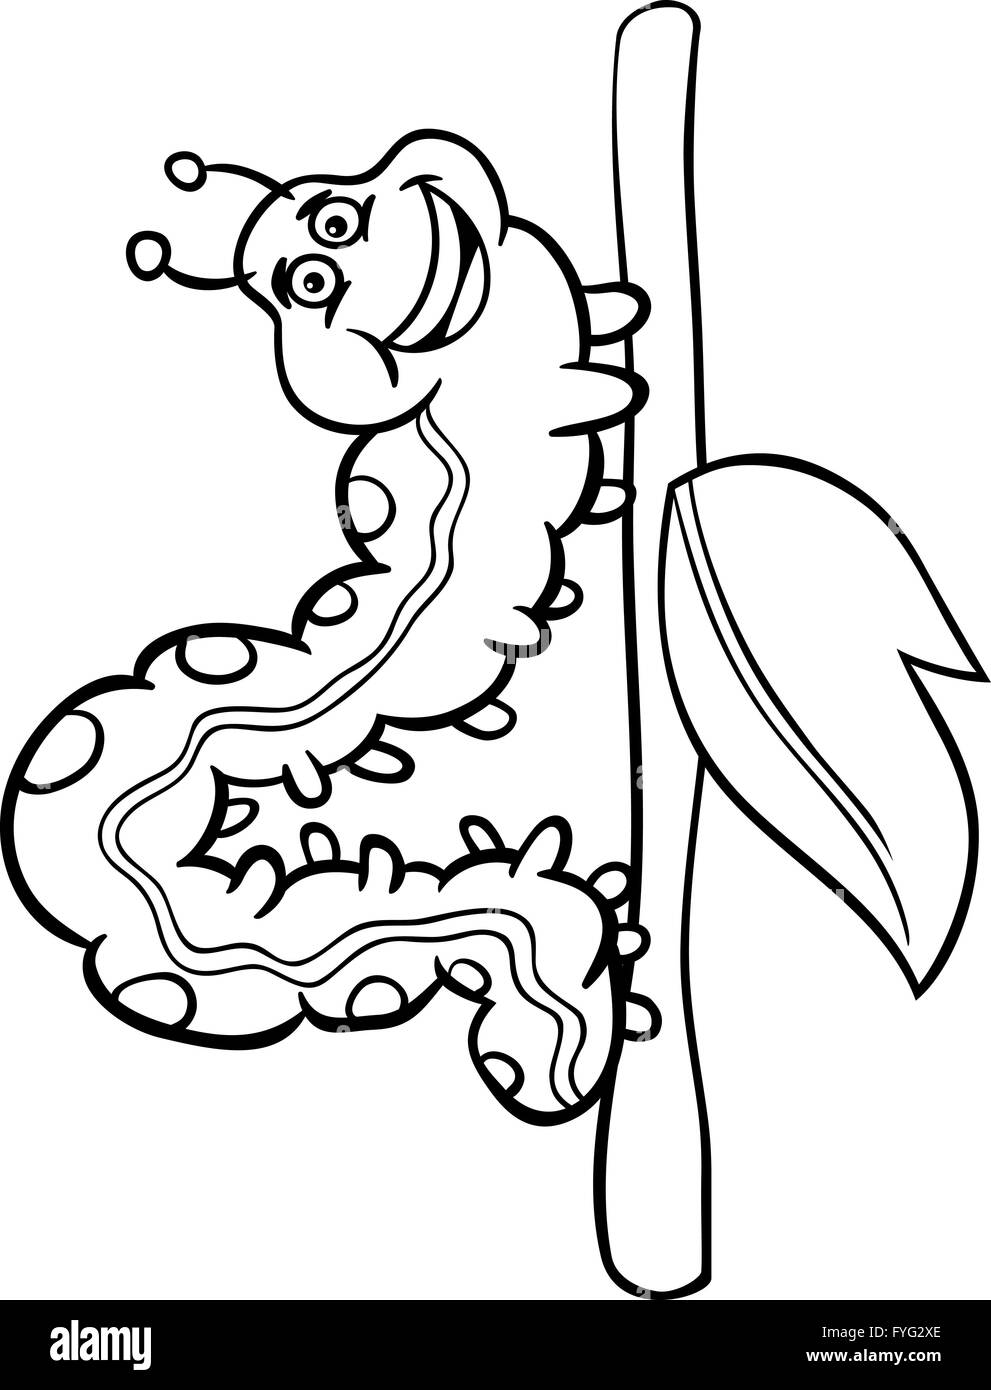 caterpillar insect cartoon for coloring book Stock Photo